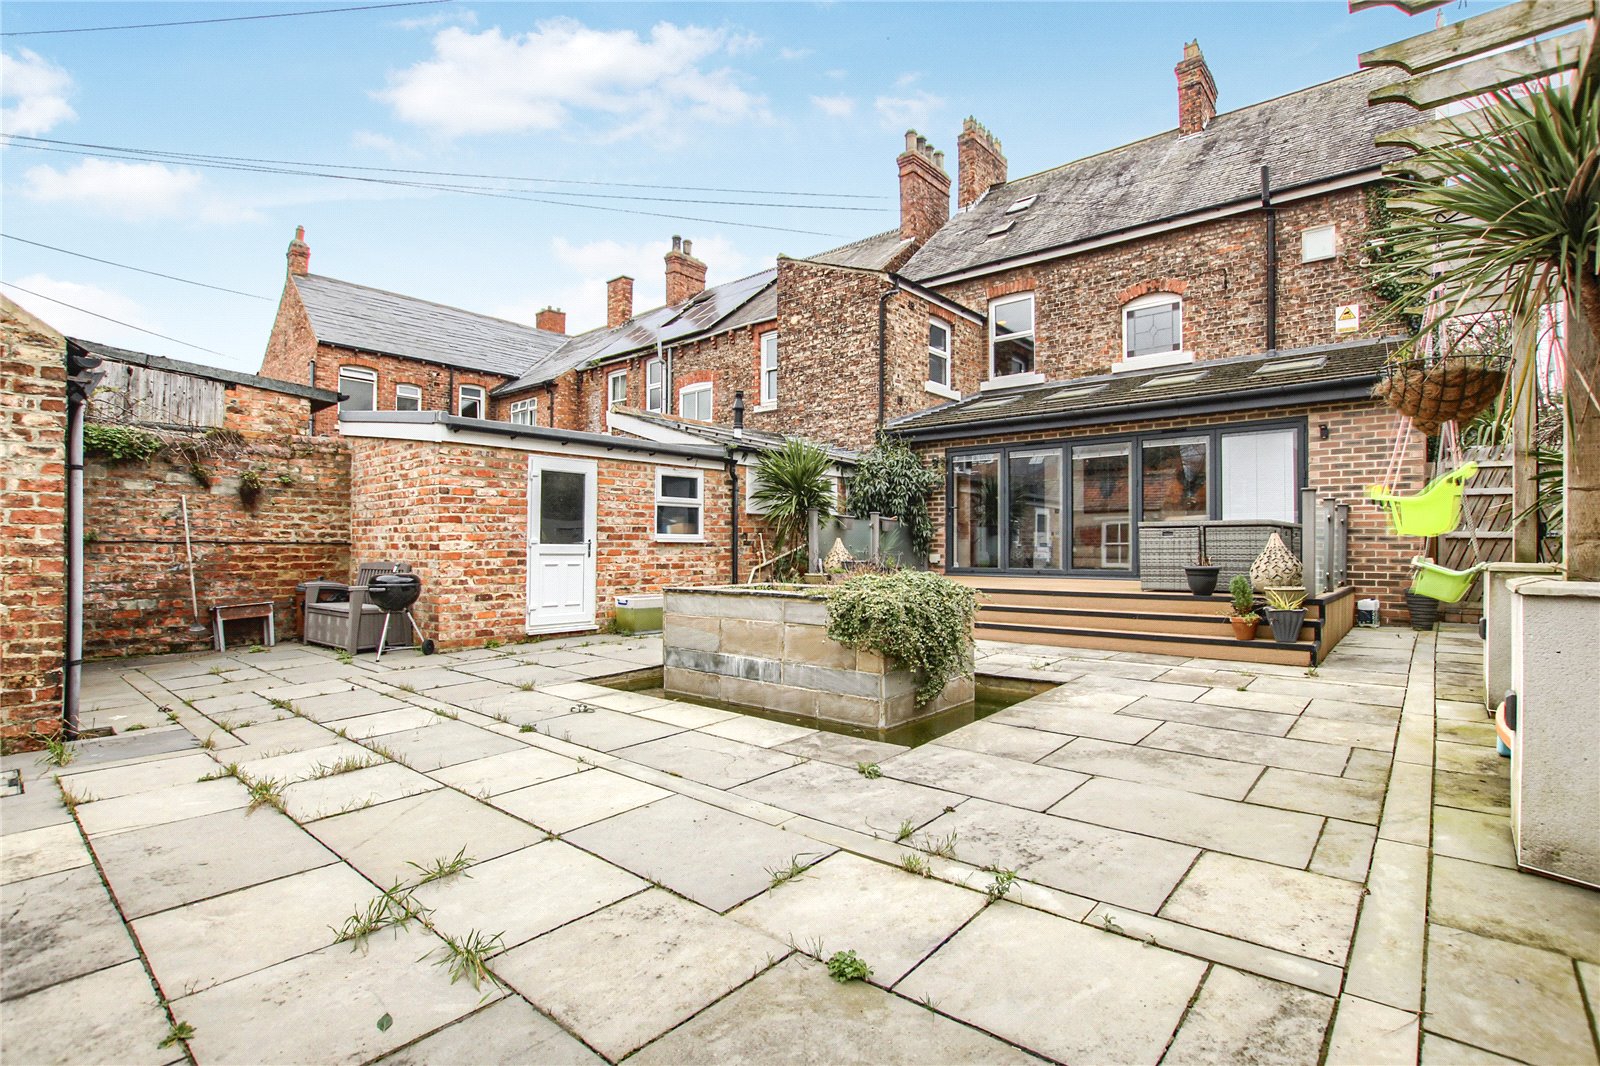 5 bed house for sale in The Avenue, Linthorpe  - Property Image 2